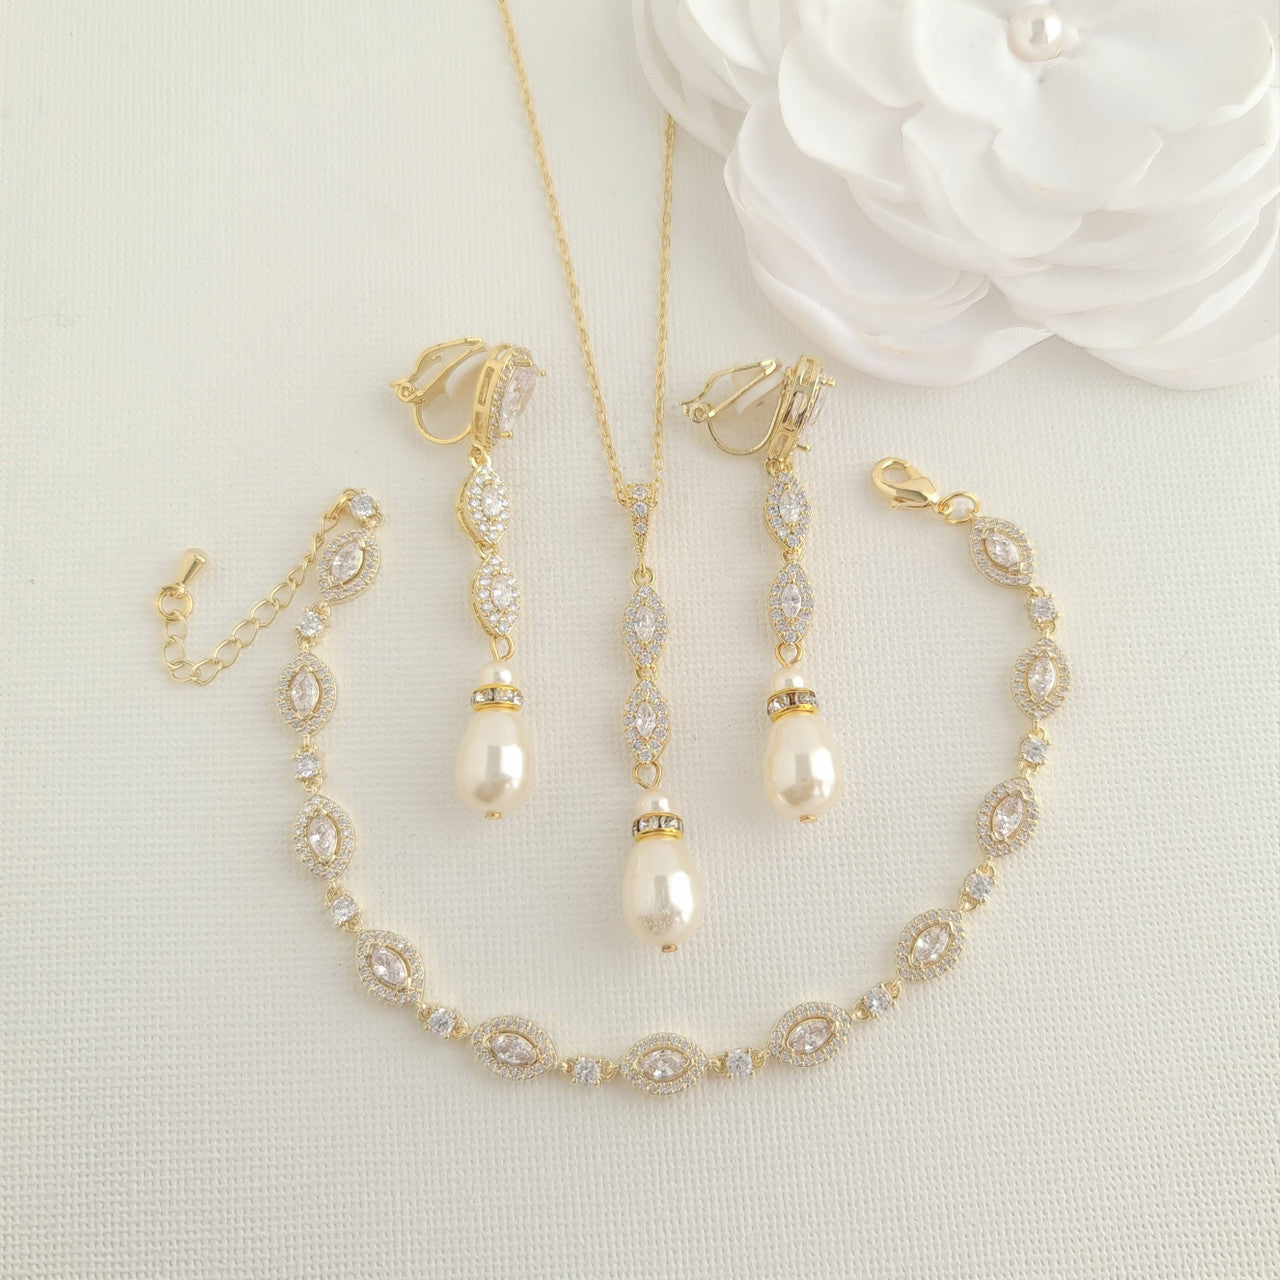 Bridal Jewellery Set With Clip On Earrings Necklace Bracelet- Abby